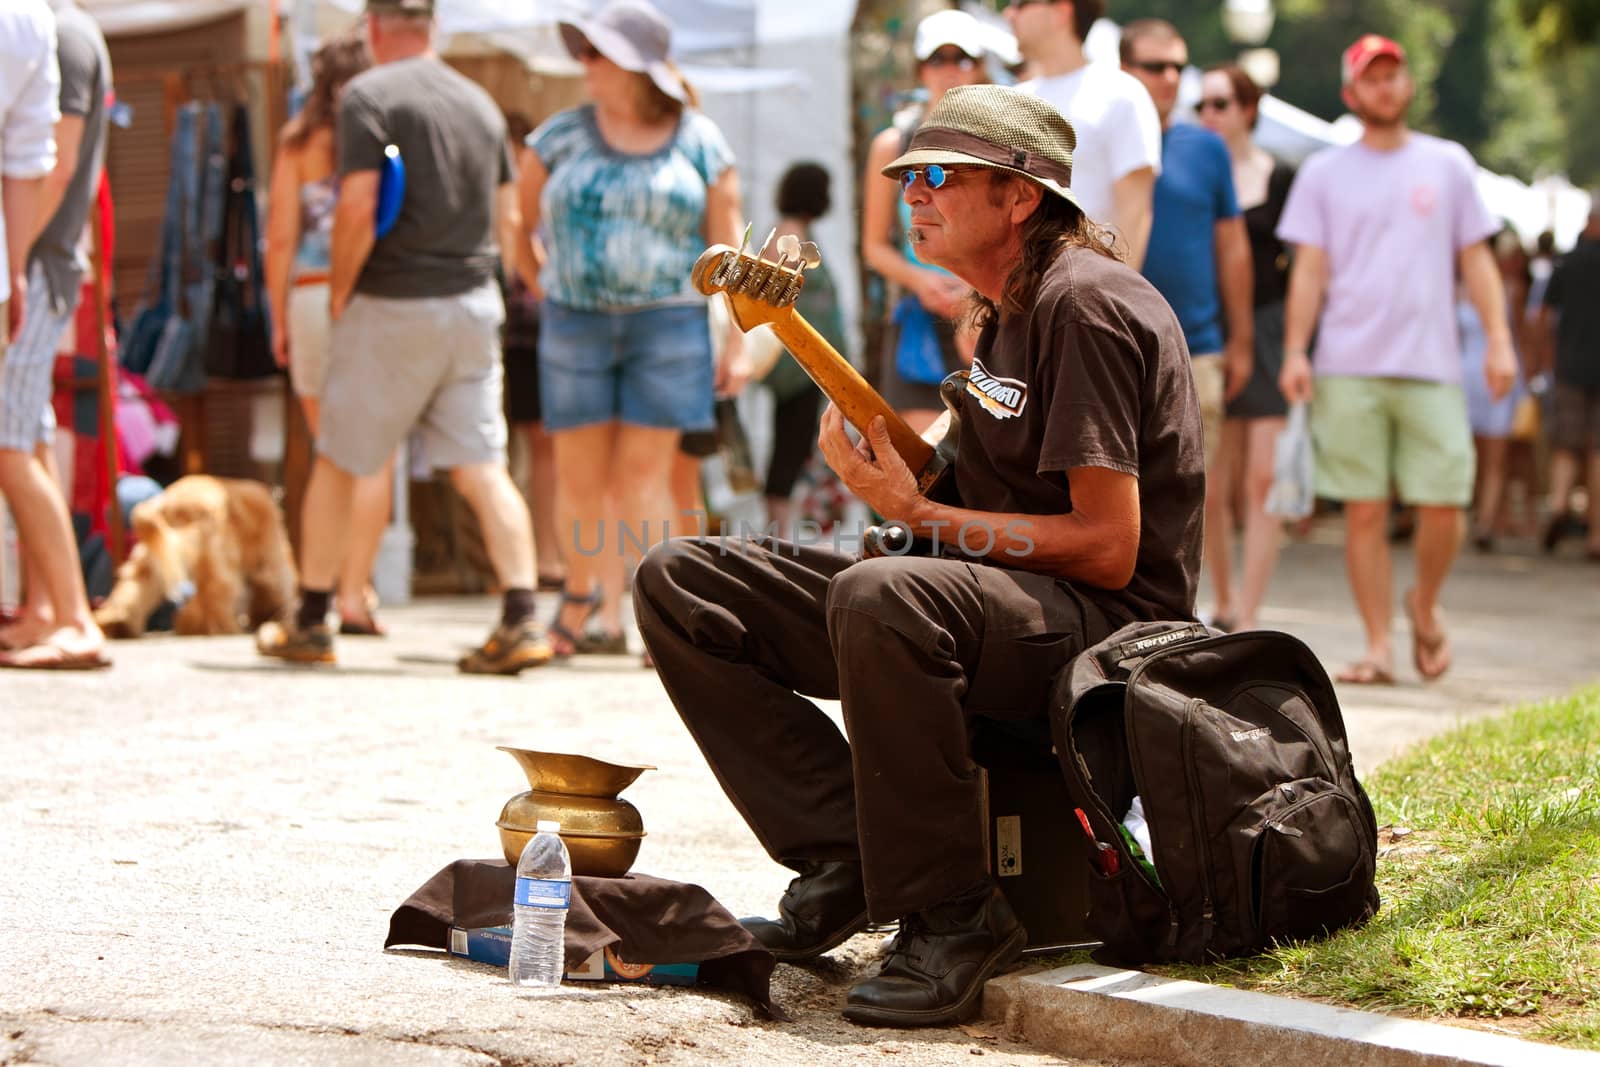 Atlanta, GA, USA - August 16, 2014:  A man plays bass guitar for tips while sitting on the curb at the Piedmont Park Arts Festival.  